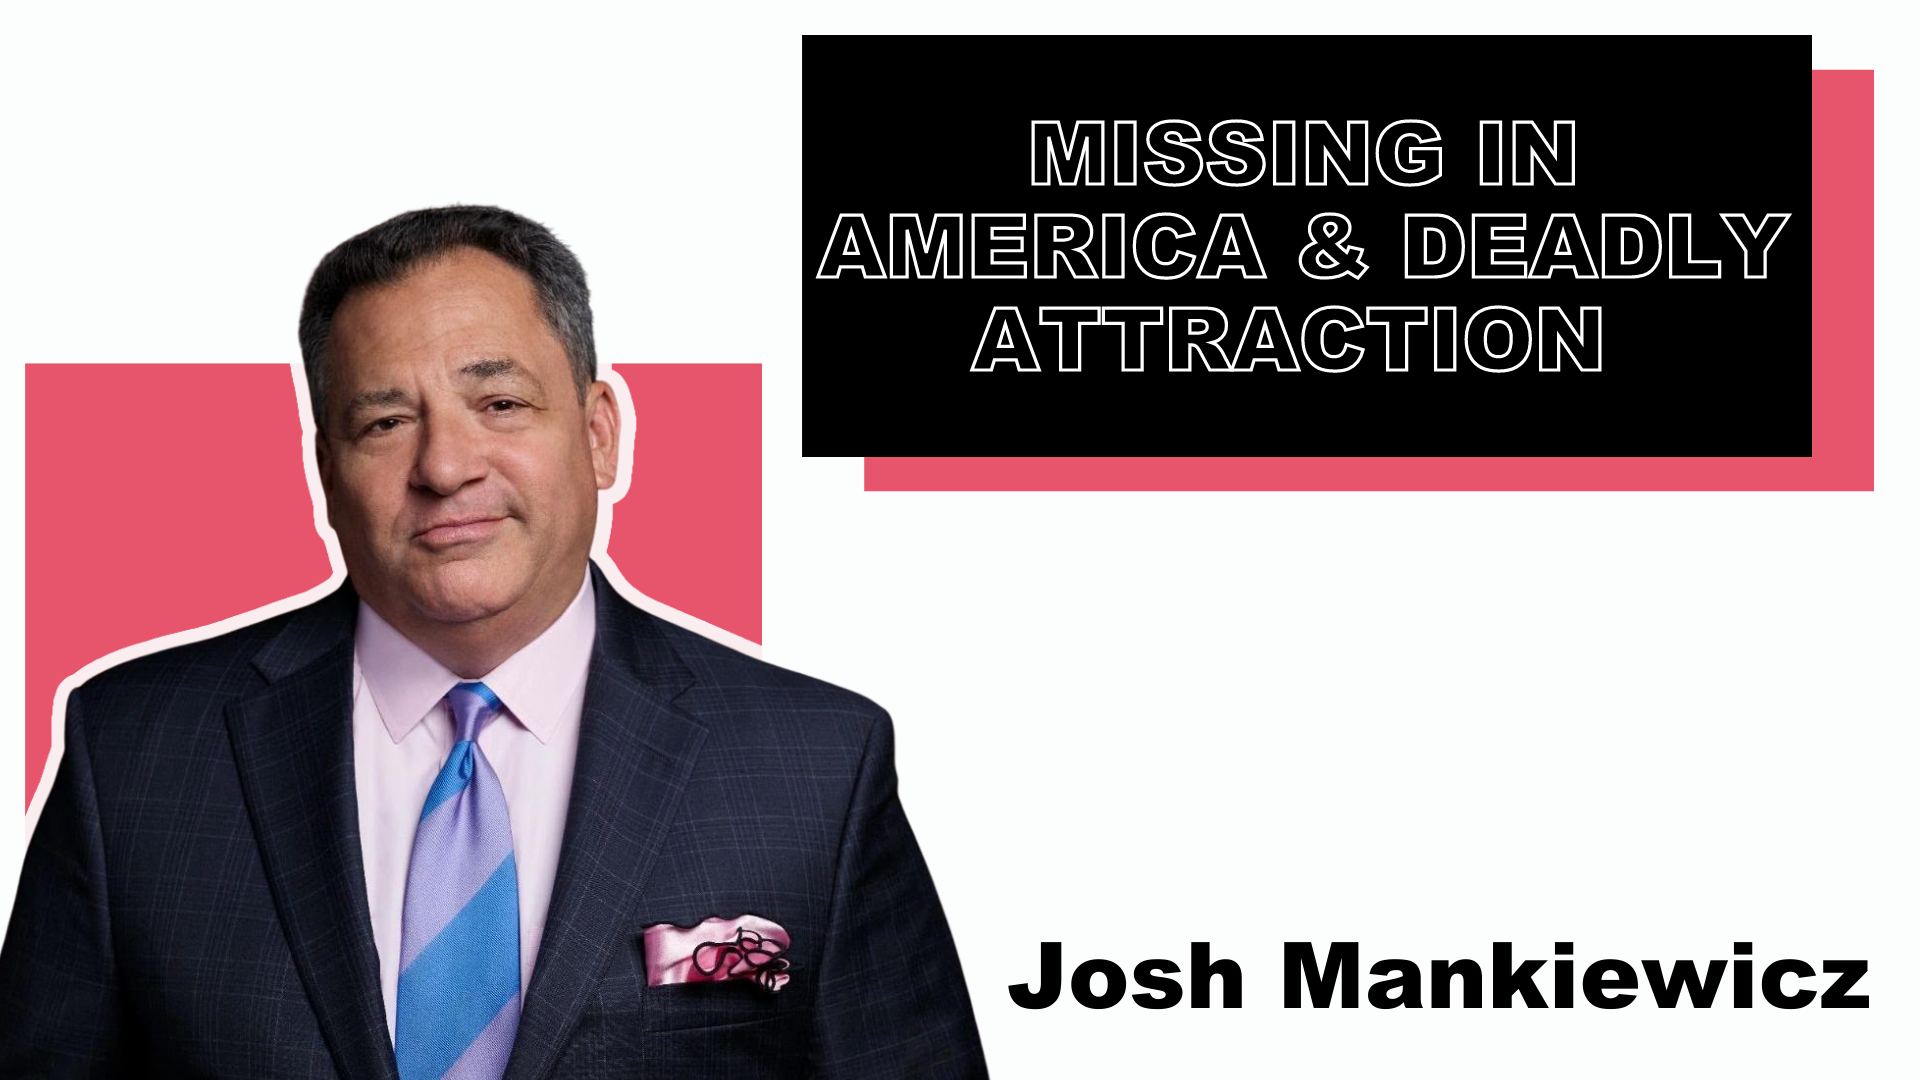 Missing in America and Deadly Attraction, Josh Mankiewicz